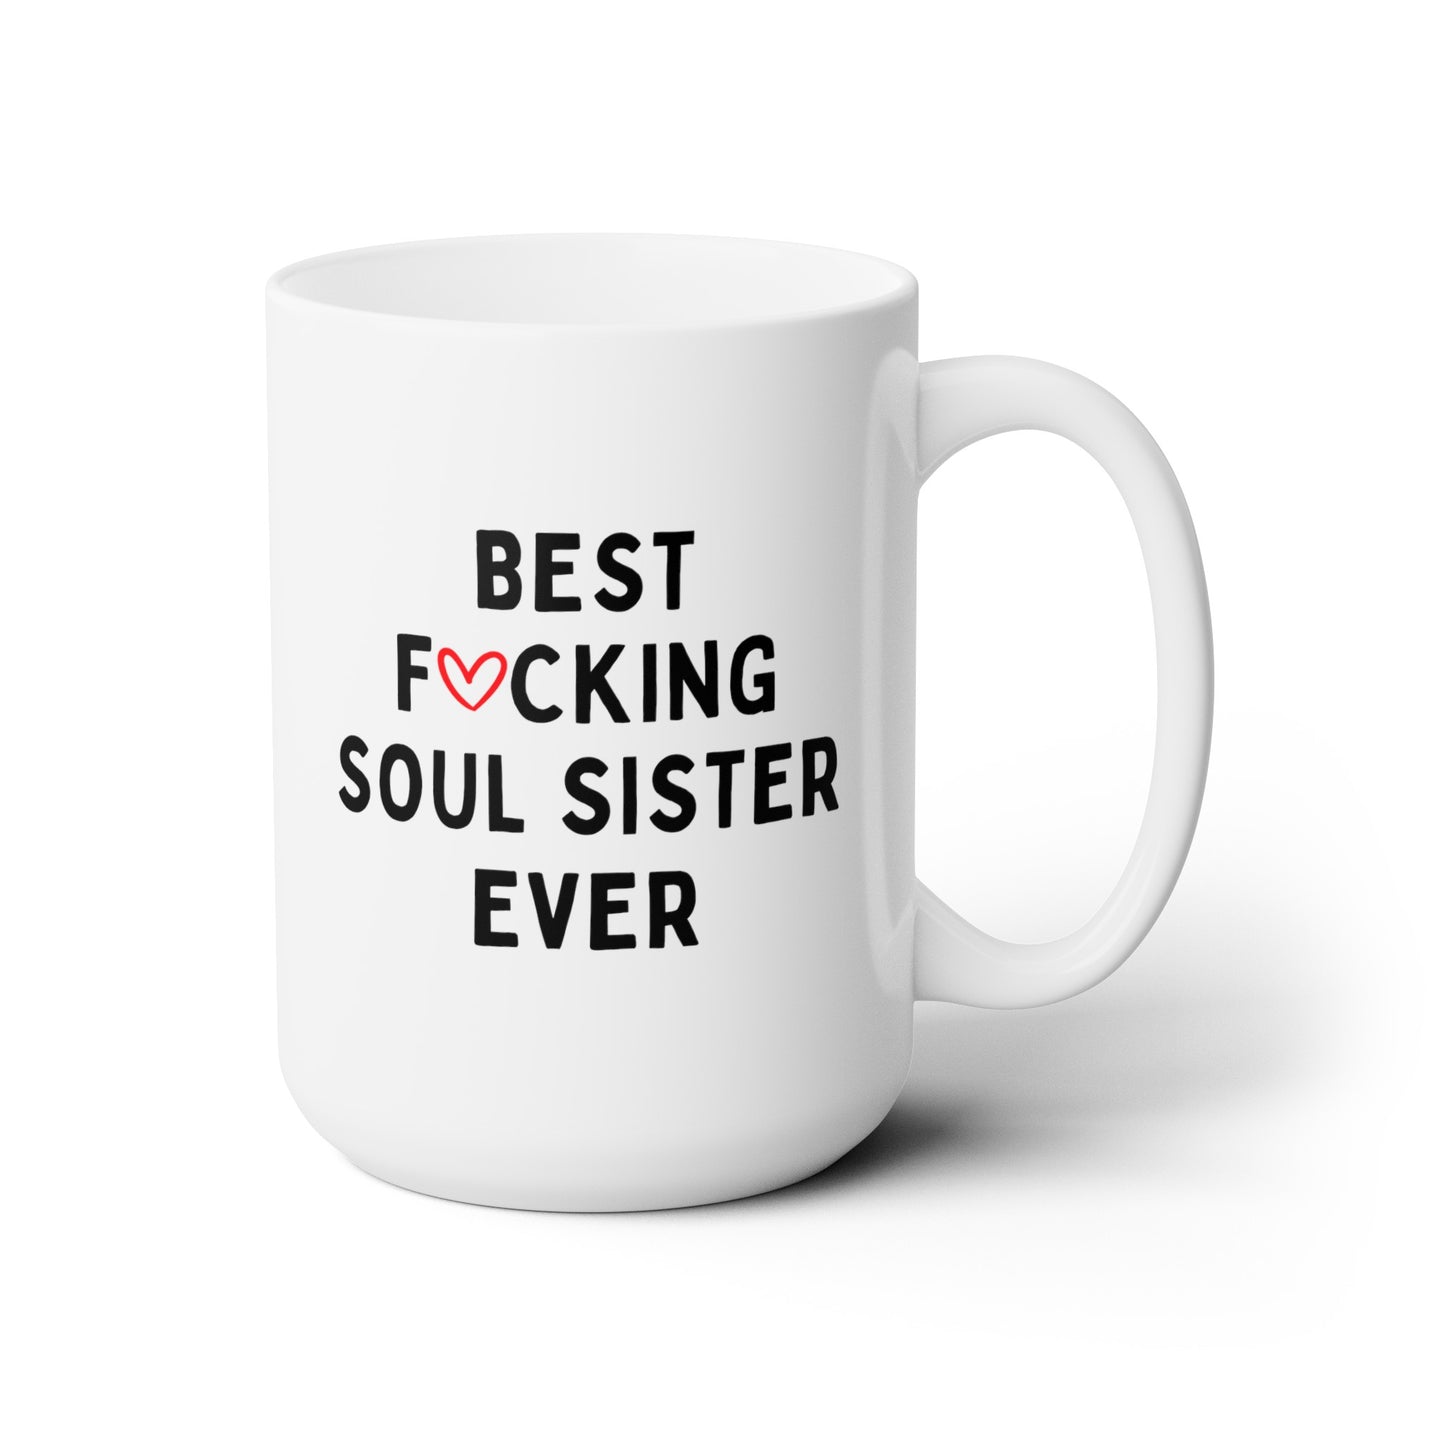 Best Fucking Soul Sister Ever 15oz white funny large coffee mug gift for her cuss curse waveywares wavey wares wavywares wavy wares